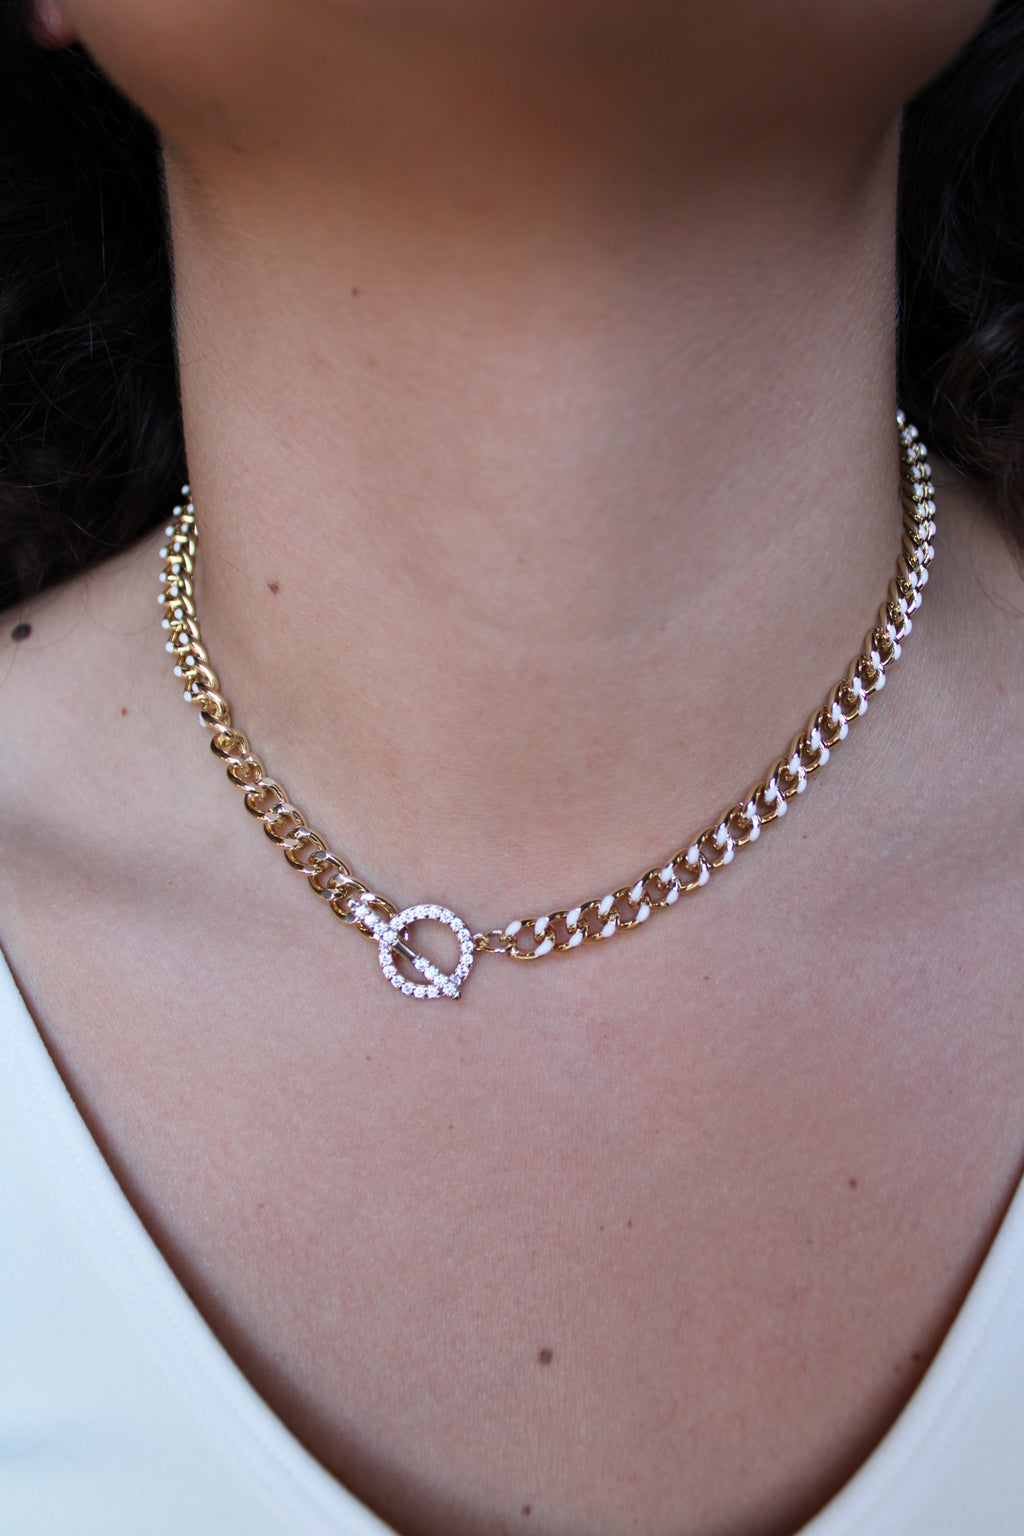 White Chunky Chain Link Necklace